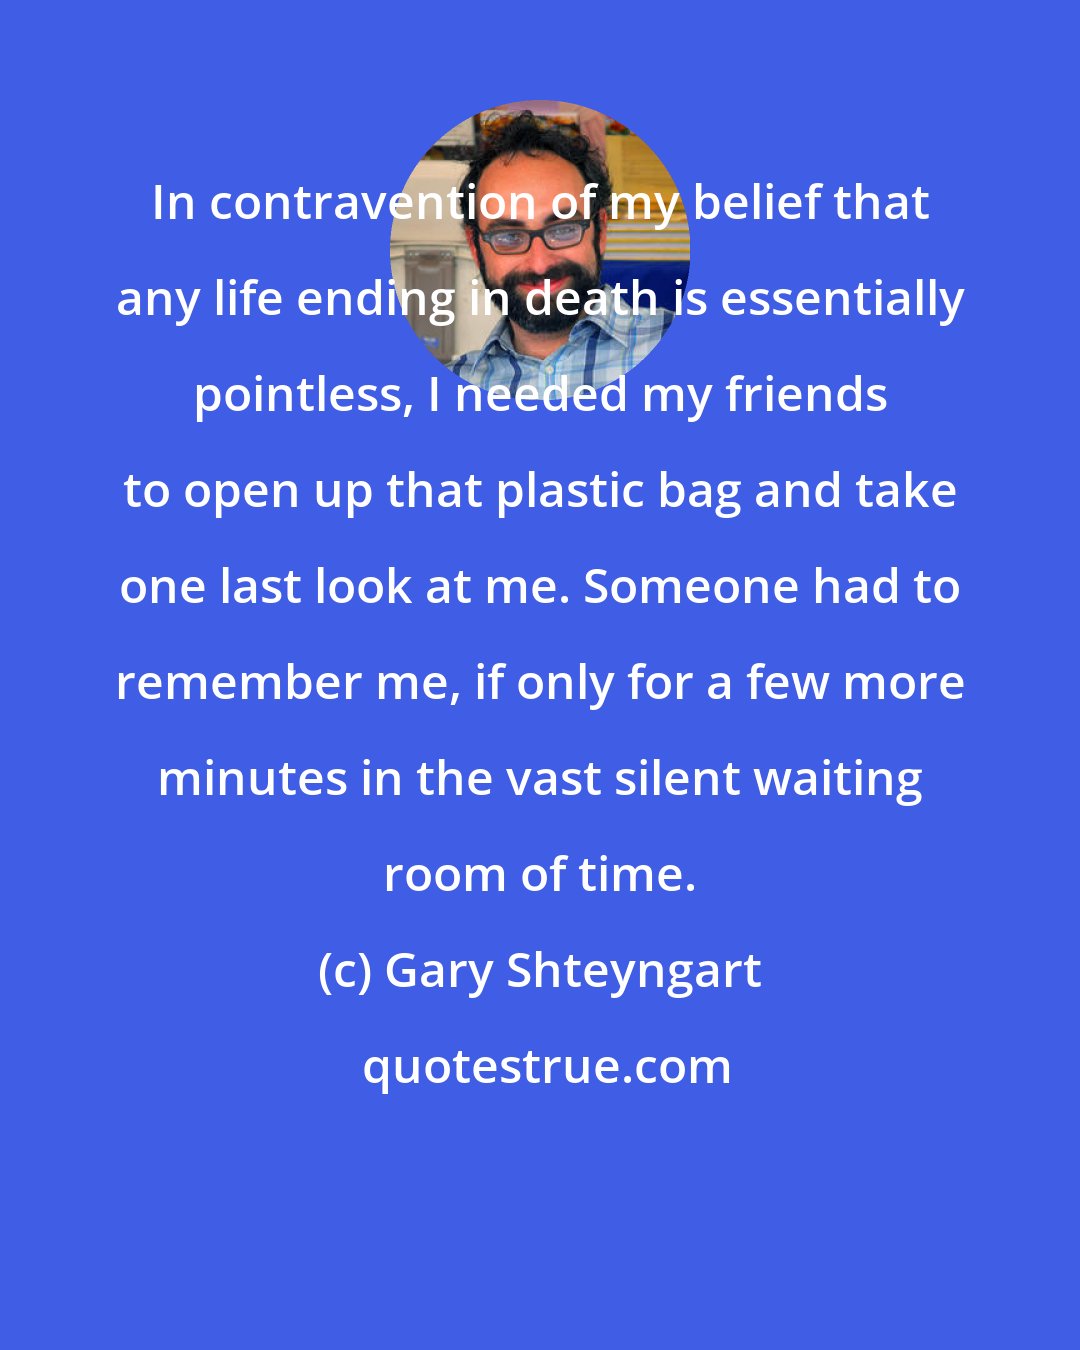 Gary Shteyngart: In contravention of my belief that any life ending in death is essentially pointless, I needed my friends to open up that plastic bag and take one last look at me. Someone had to remember me, if only for a few more minutes in the vast silent waiting room of time.